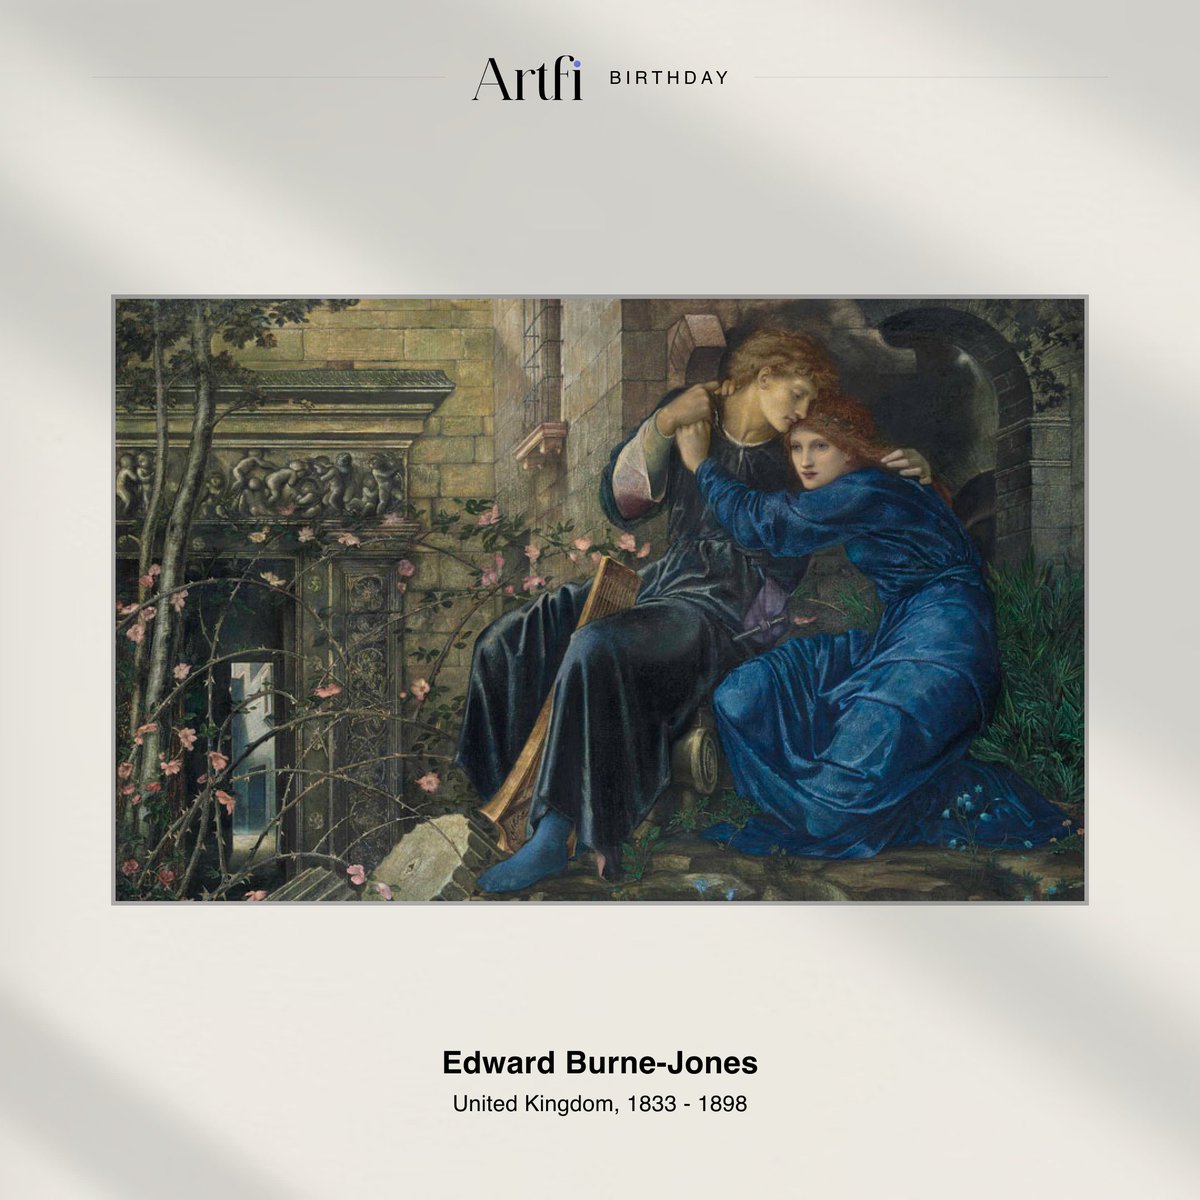 Edward Burne-Jones, the English Pre-Raphaelite painter known for his romantic and mythological works, was born on this day in 1833. His legacy continues to inspire and influence artists around the world. #EdwardBurneJones #PreRaphaelites #EnglishArt #ArtHistory